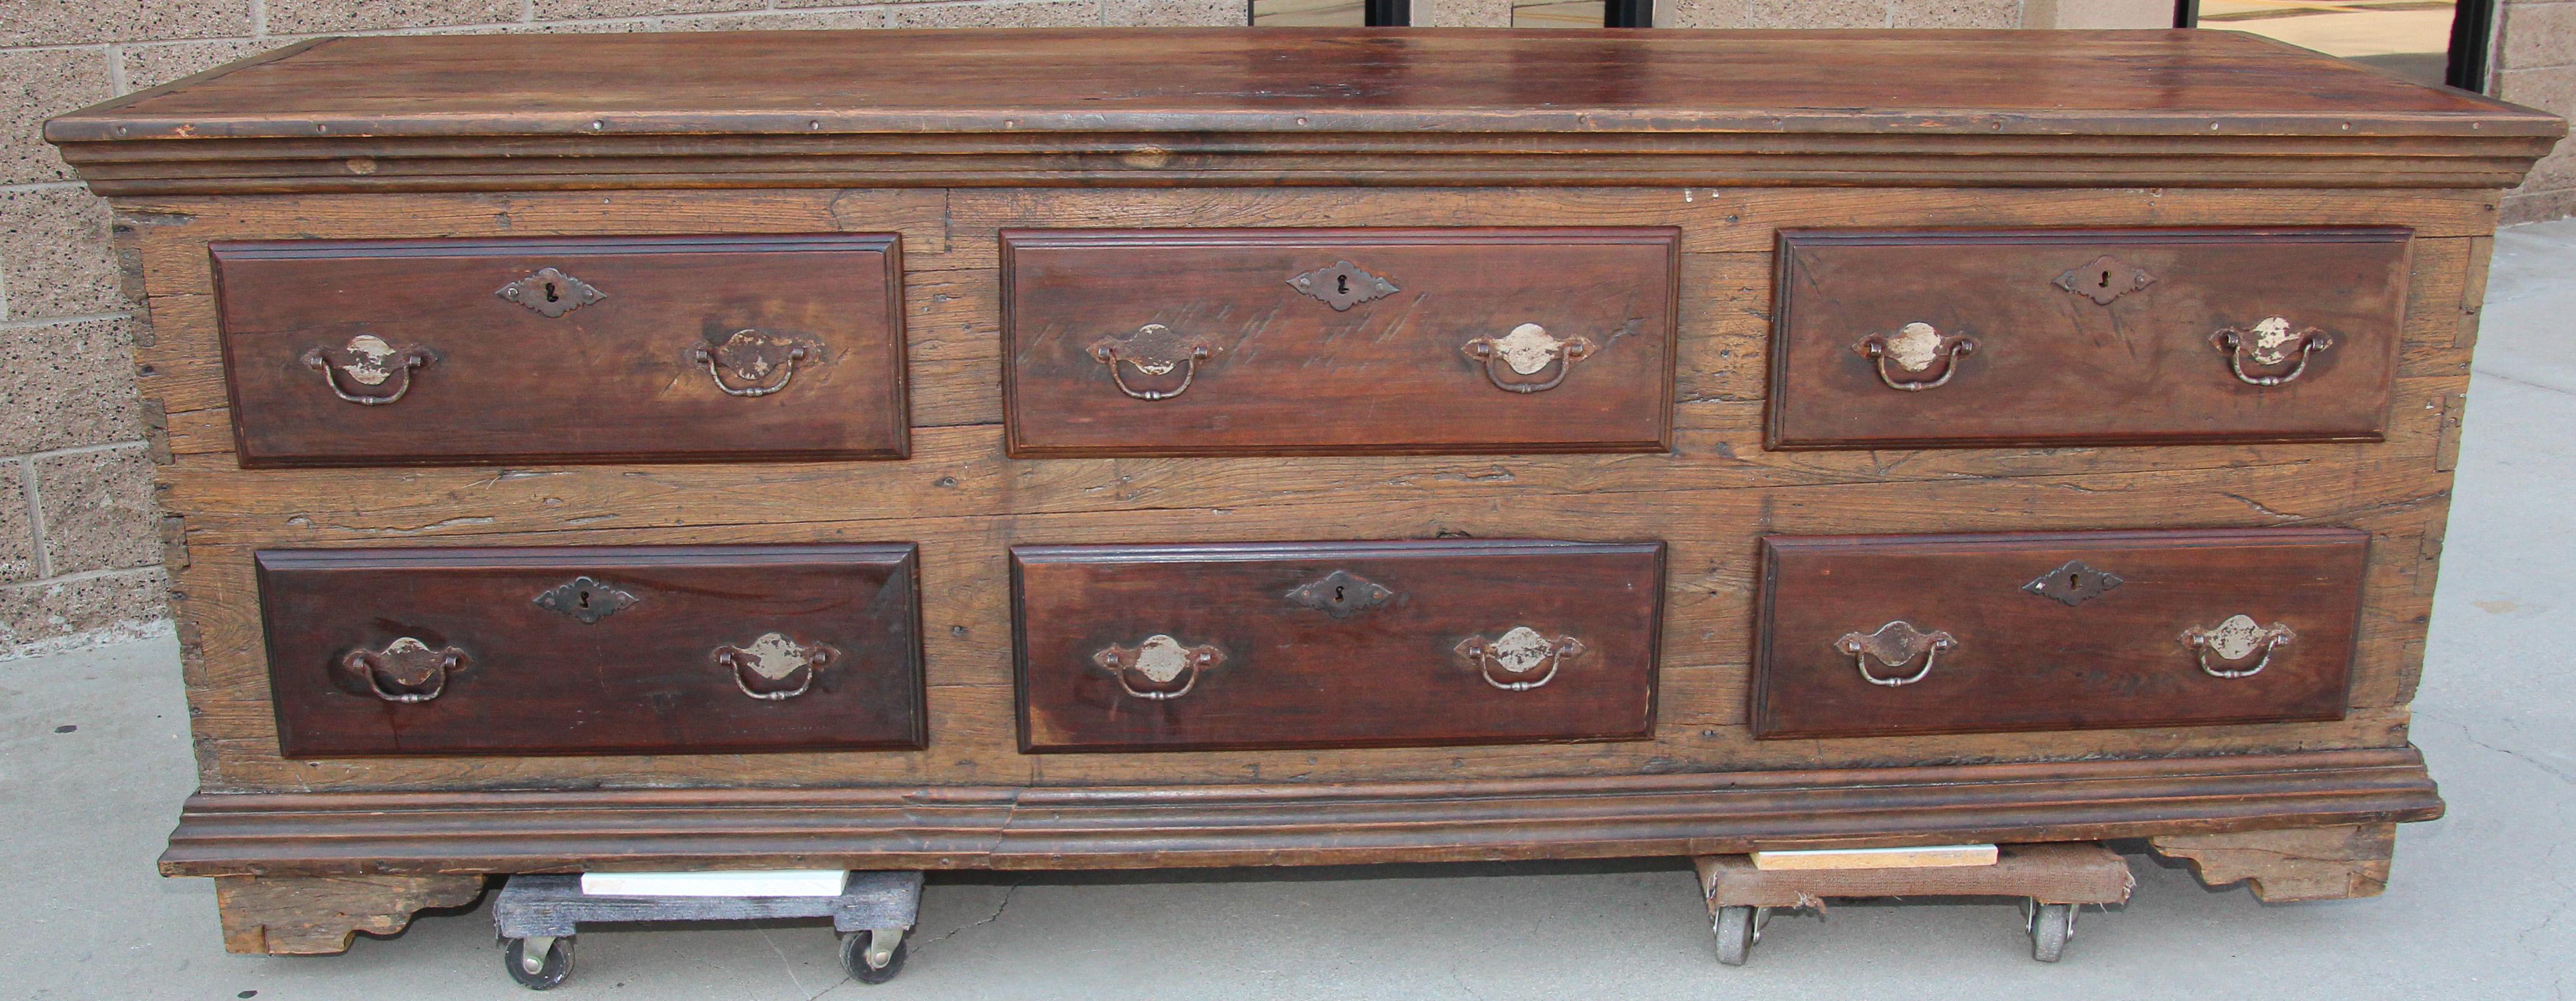 Monumental Antique solid rustic oak Arts & Crafts country chest, sideboard.
A superb large antique rustic oak country house dresser base, great height, six very large drawers.
This is a very substantial, very heavy, extra long, extra large chest